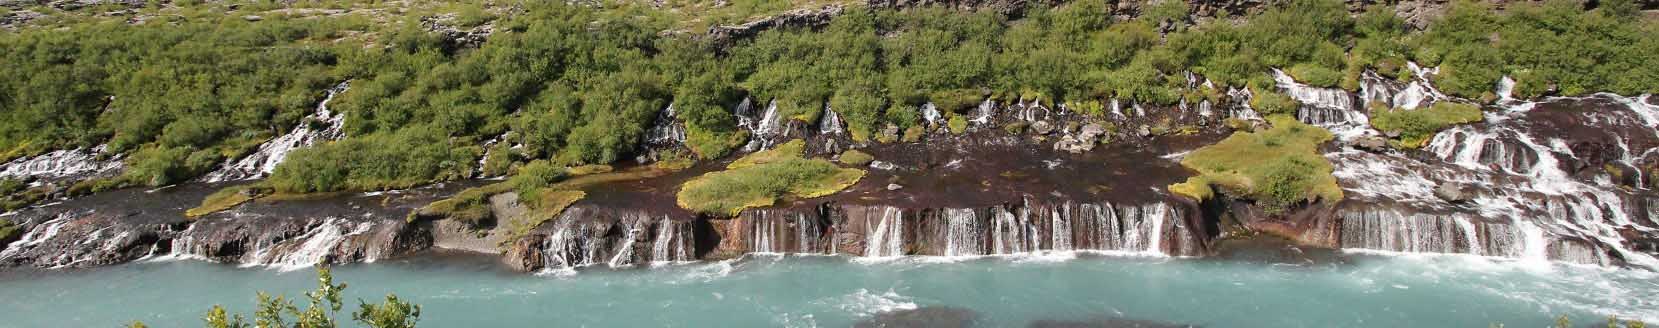 Highlights of Iceland Ring Road